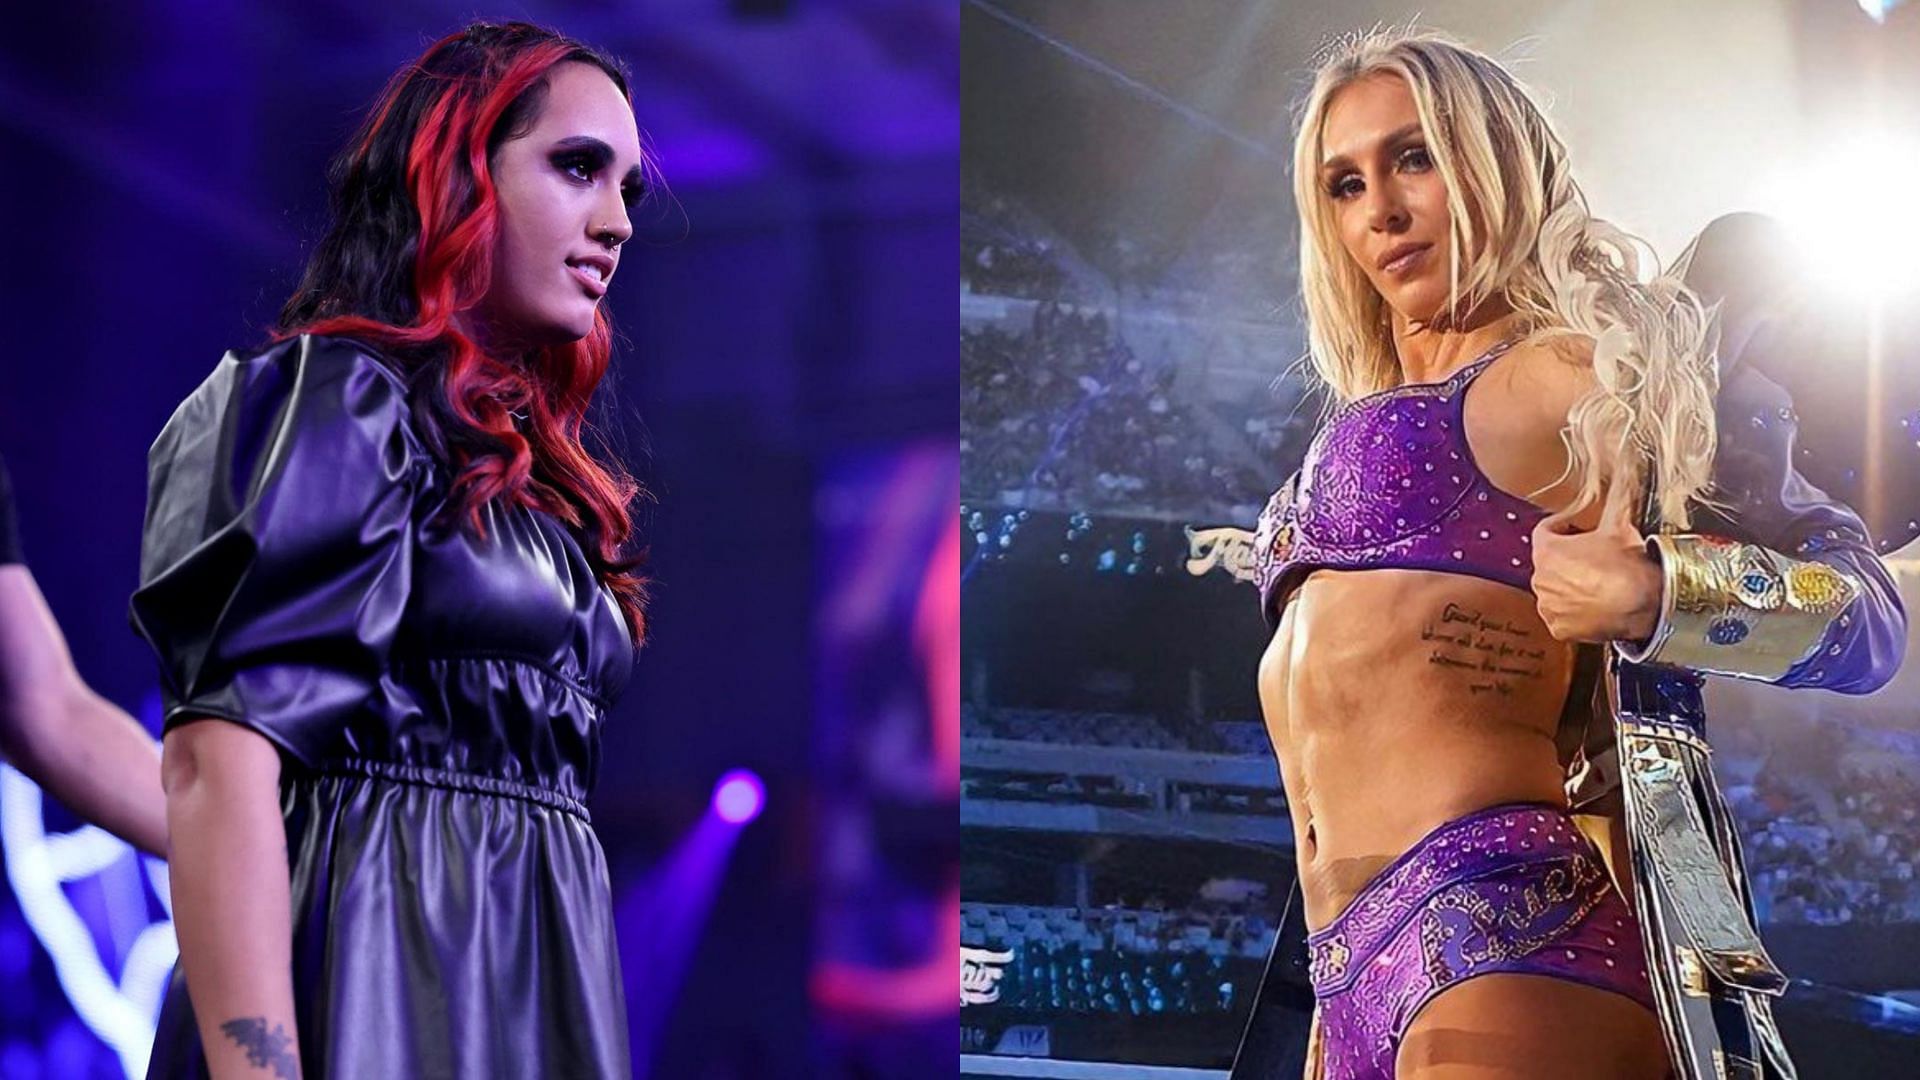 Ava Raine (left) and Charlotte Flair (right)